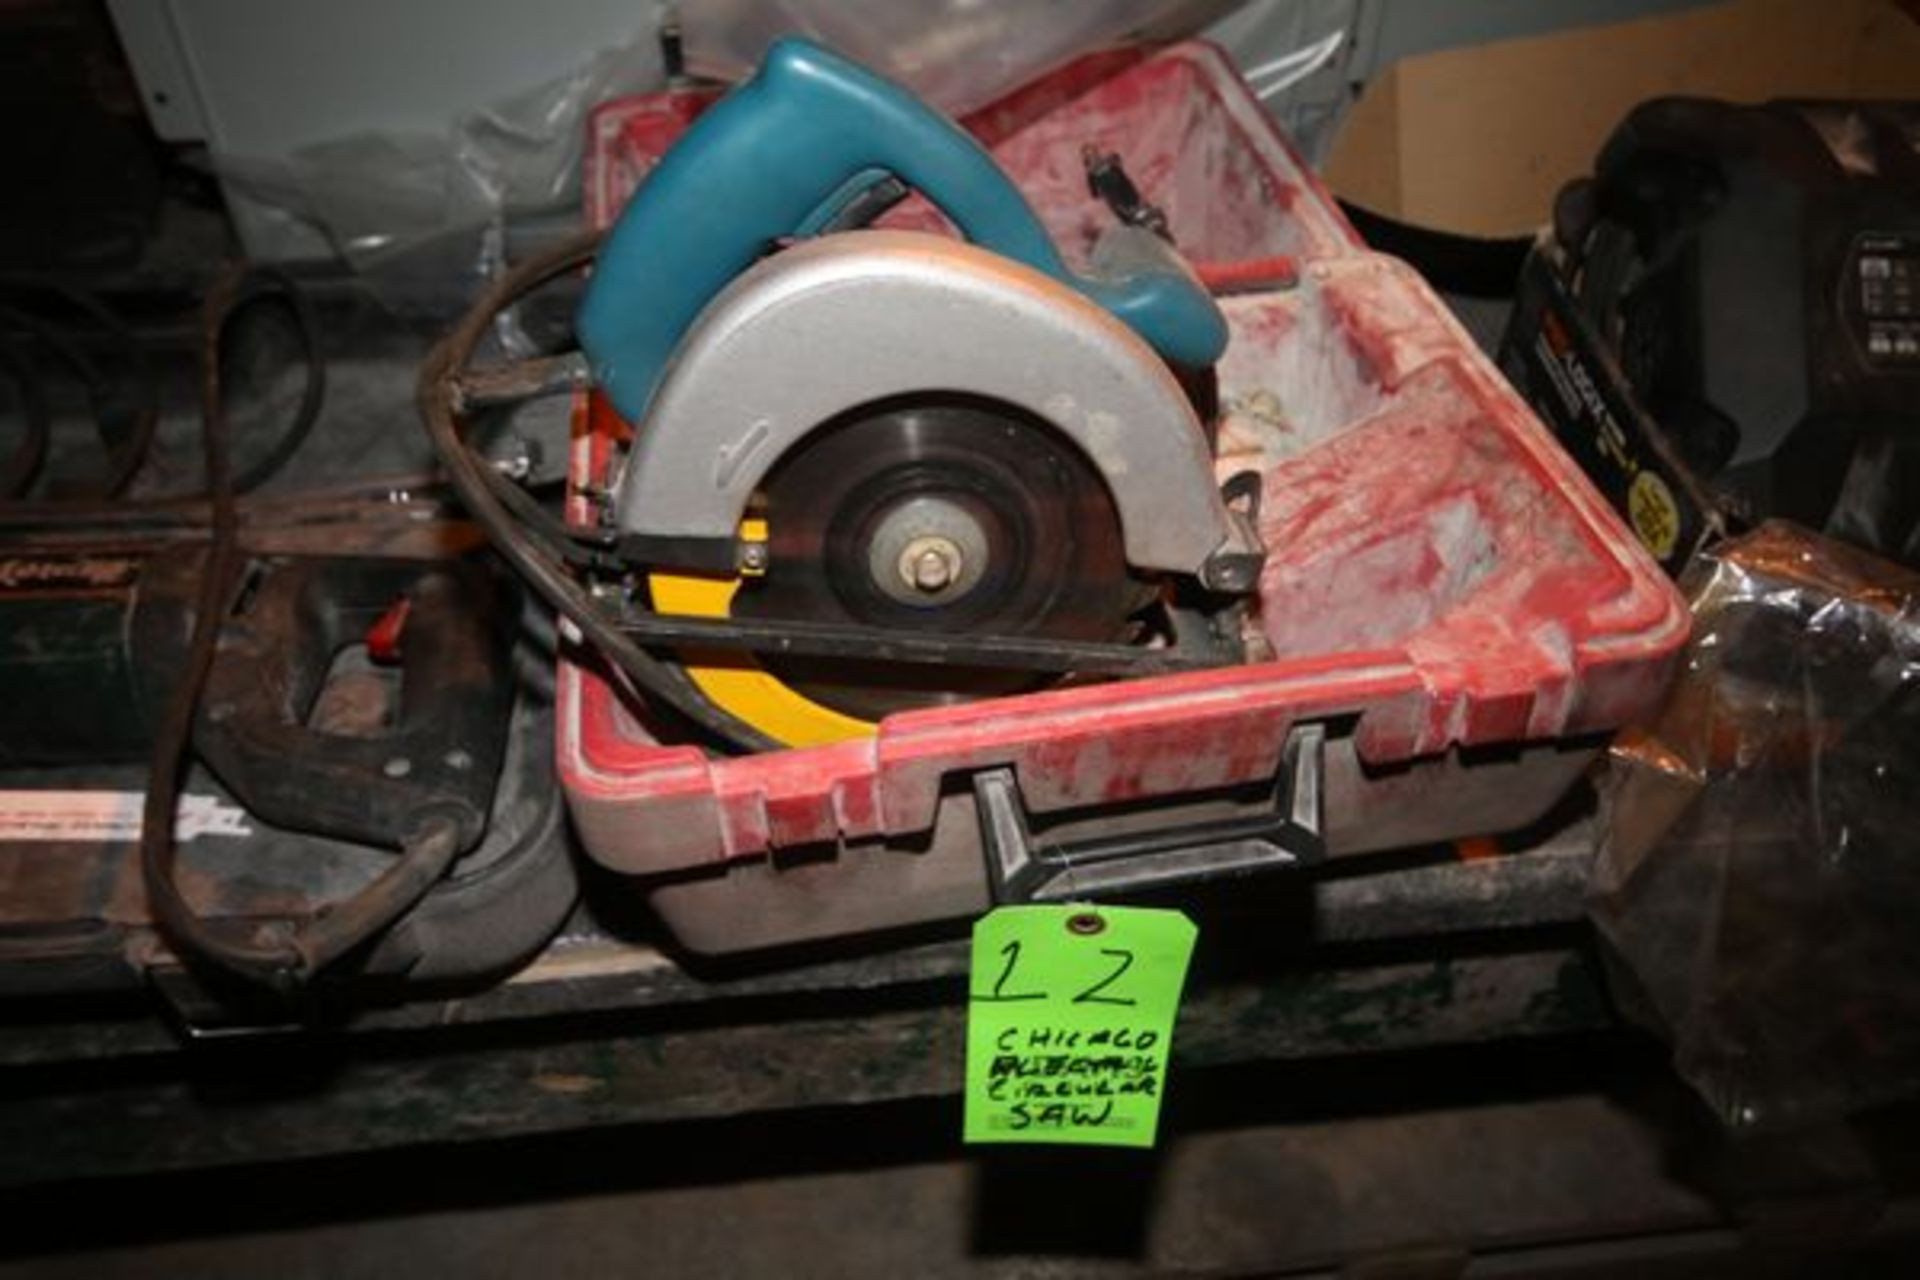 Chicago 7-1/8" Electric Circular Saw, Model 35948, S/N 85110038 with Case